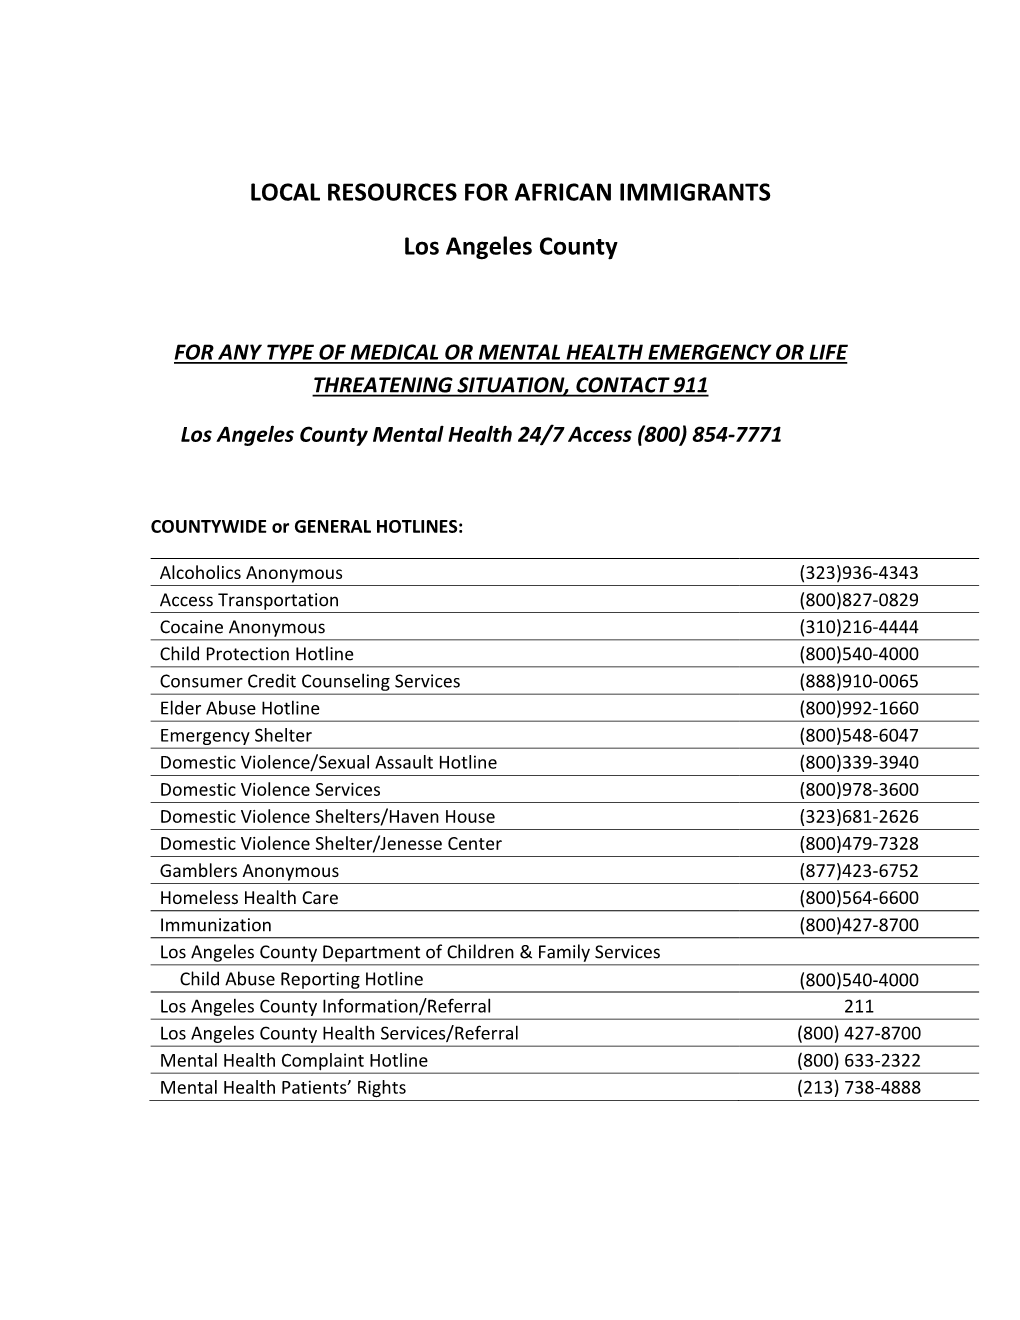 LOCAL RESOURCES for AFRICAN IMMIGRANTS Los Angeles County